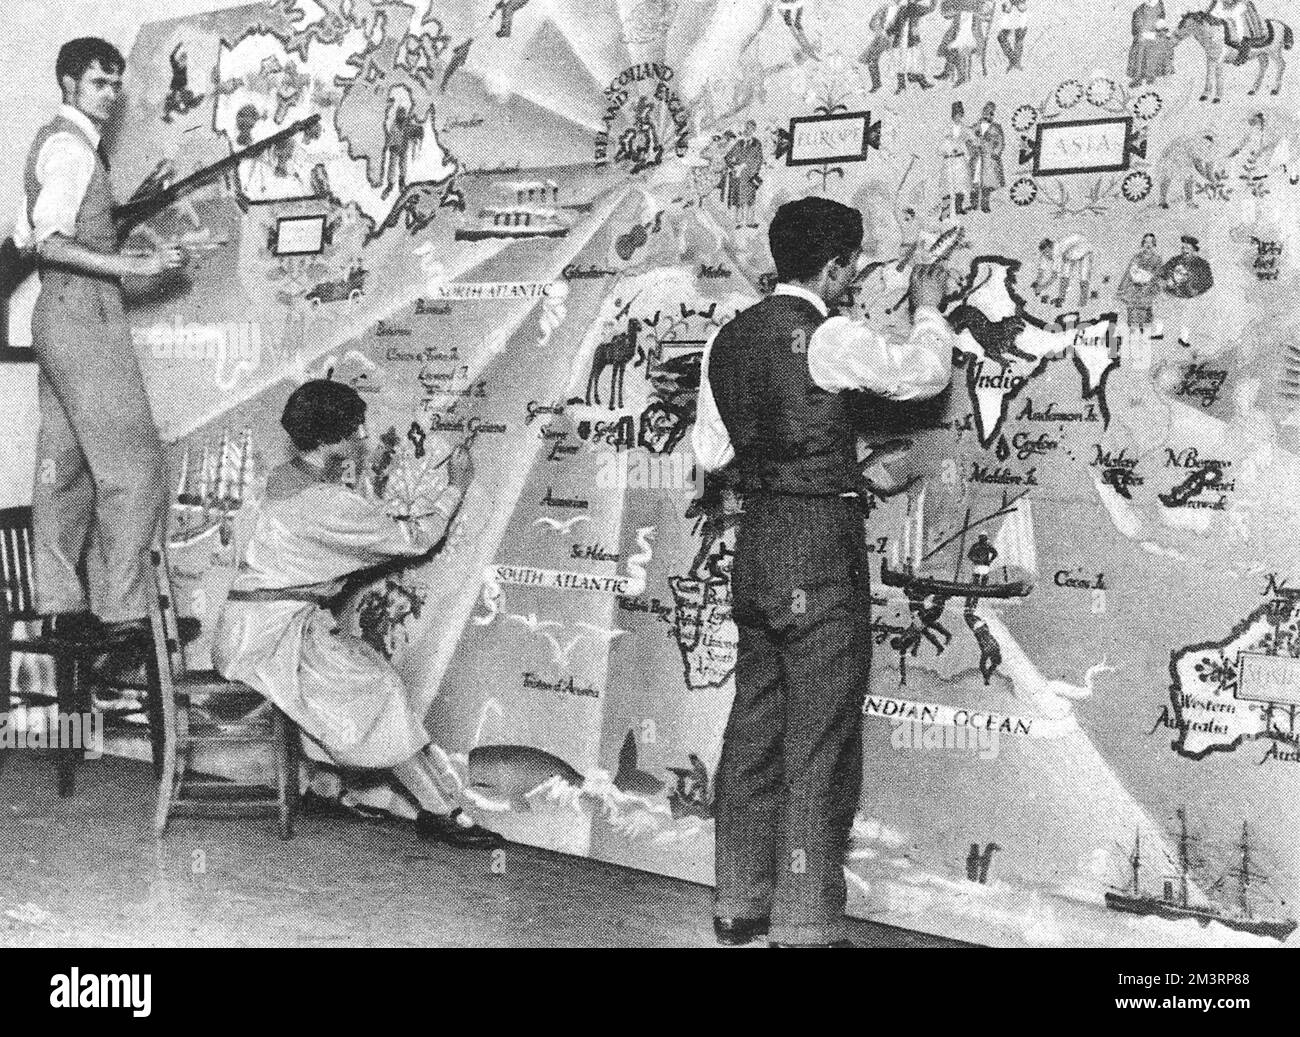 Black and white photograph of artist Stephen Bone in the Sketch of 12th December 1928, painting a mural in the new Piccadilly underground station.      Date: 12th December 1928 Stock Photo